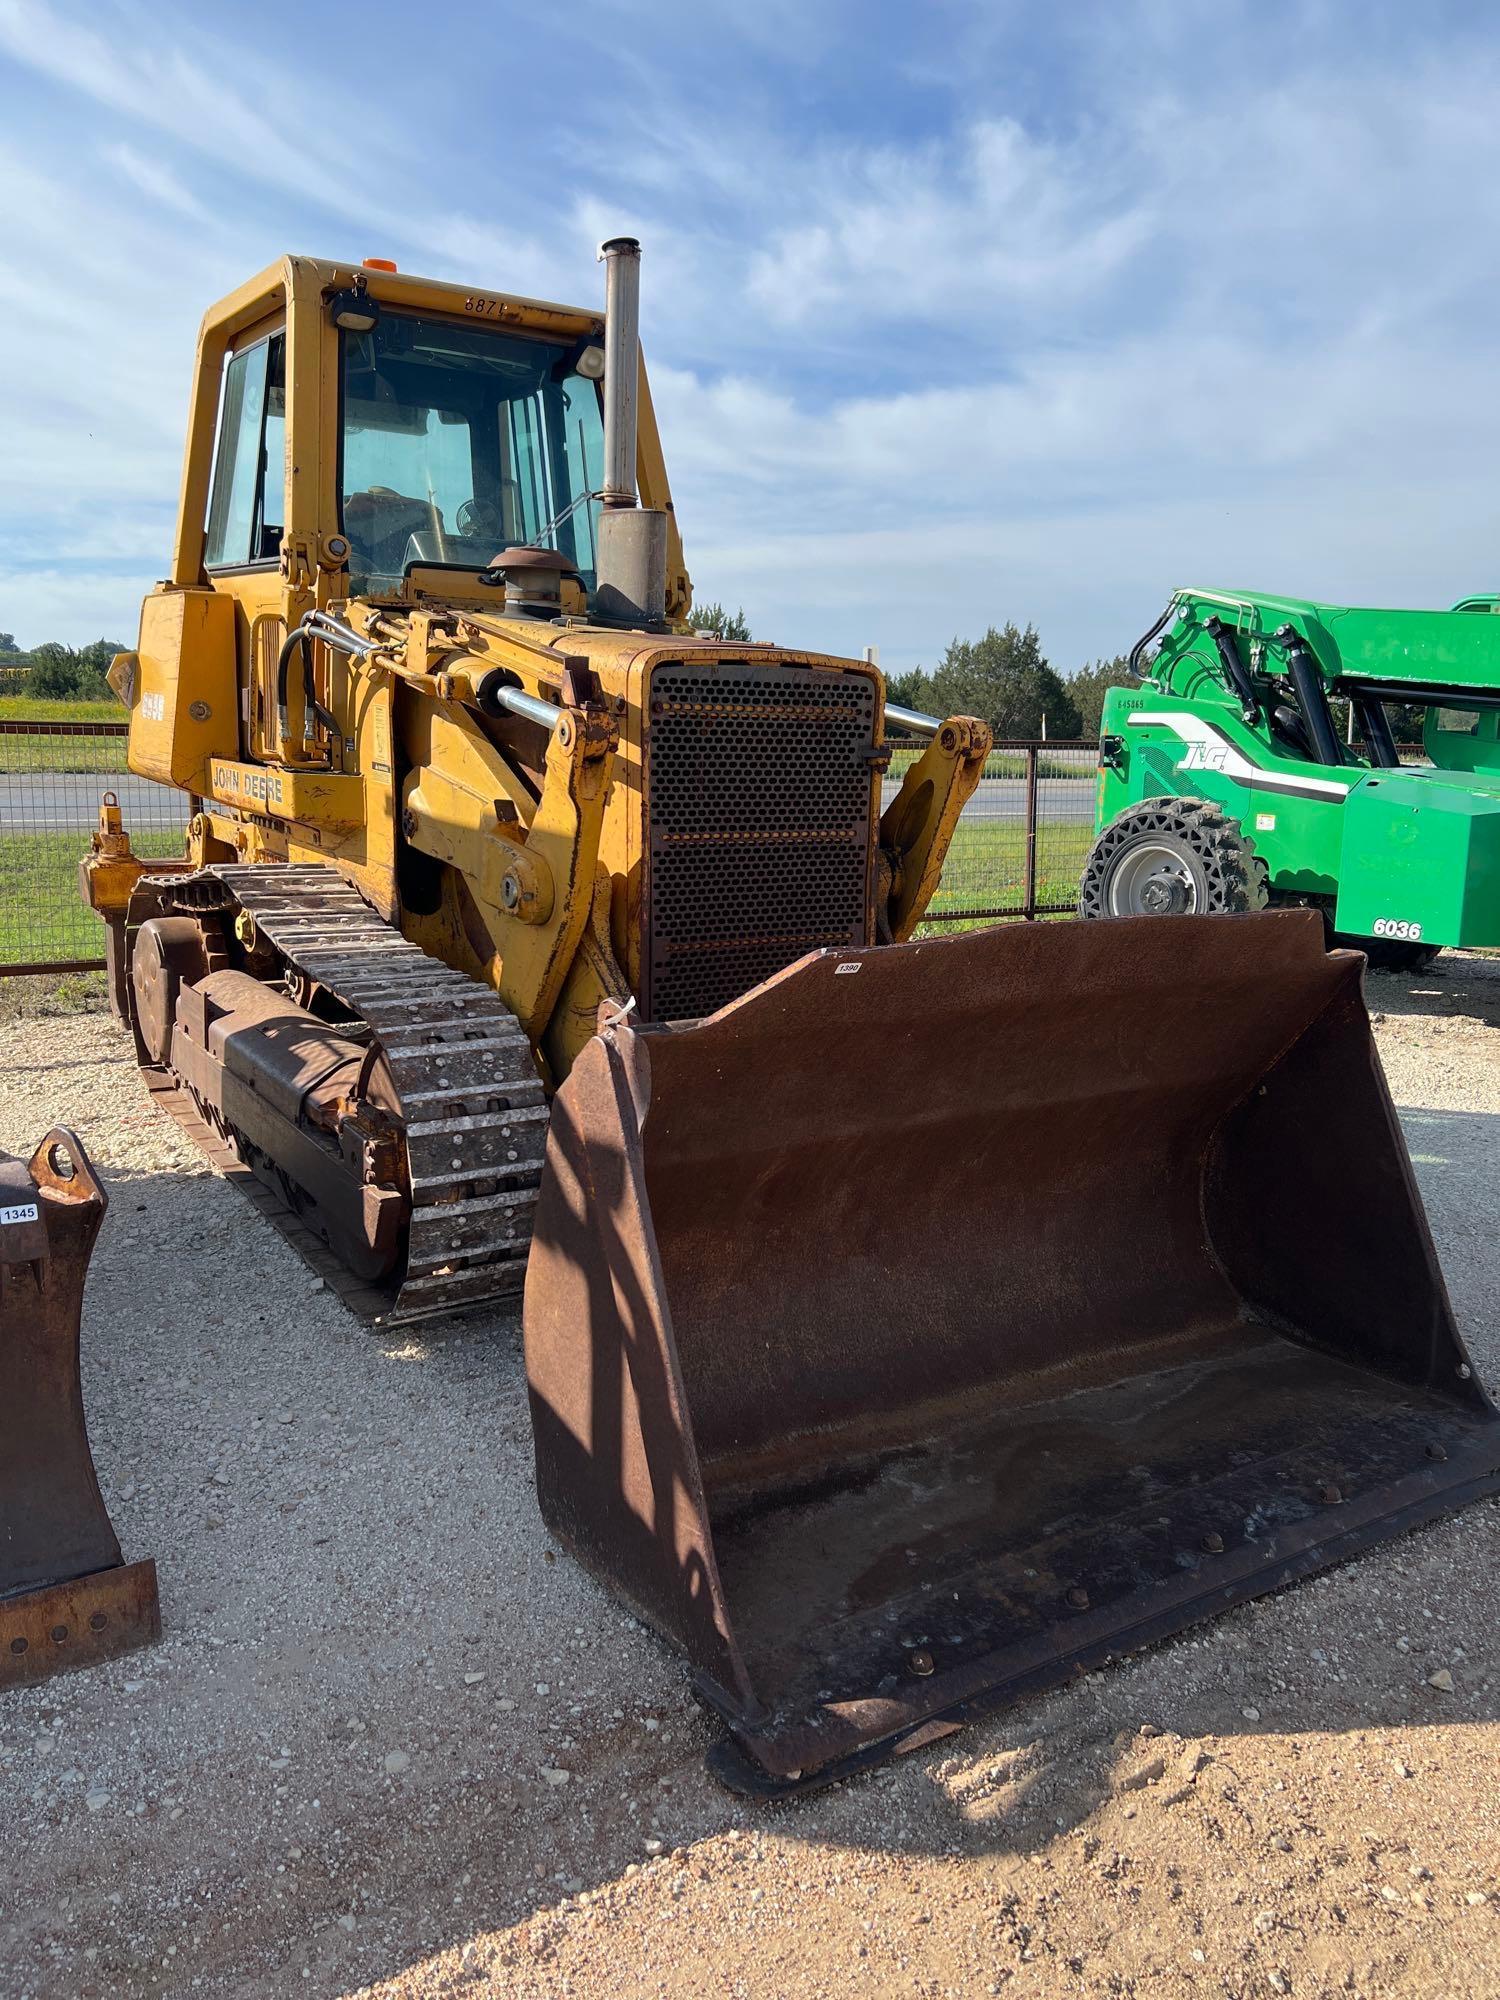 John Deere 655B Track Loader with Cab Rippers with 3 Shanks Shows 3920 HRS